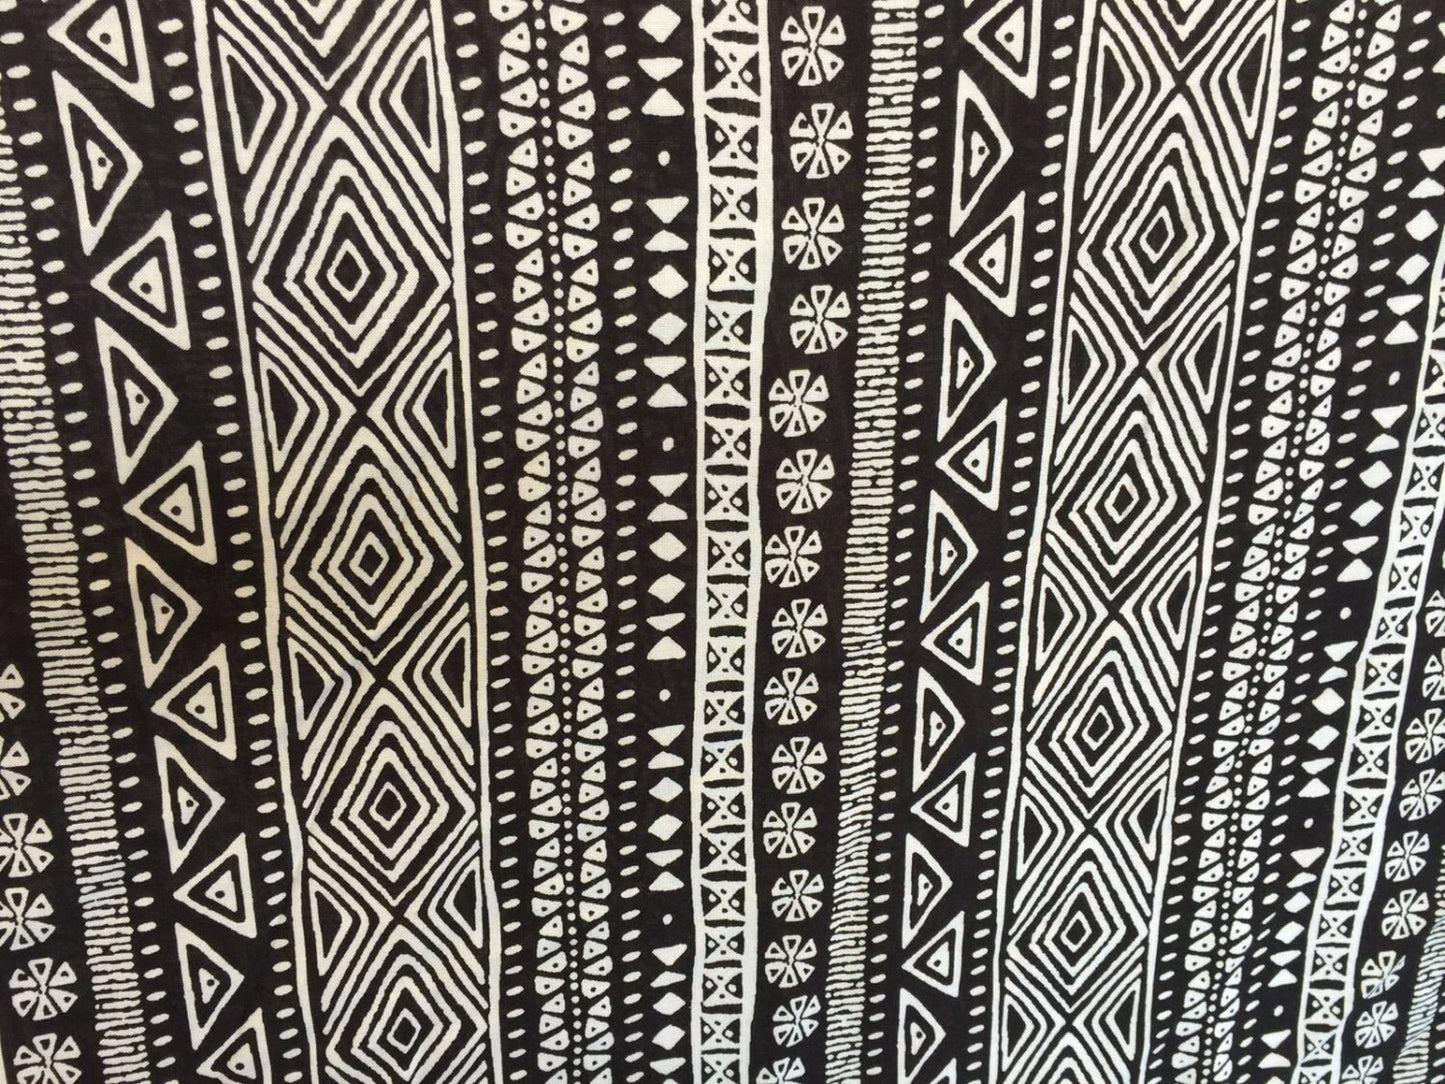 100% Rayon crepe Aboriginal inspired print off white N black fabric sold by the yard soft organic kids dress draping clothing decoration